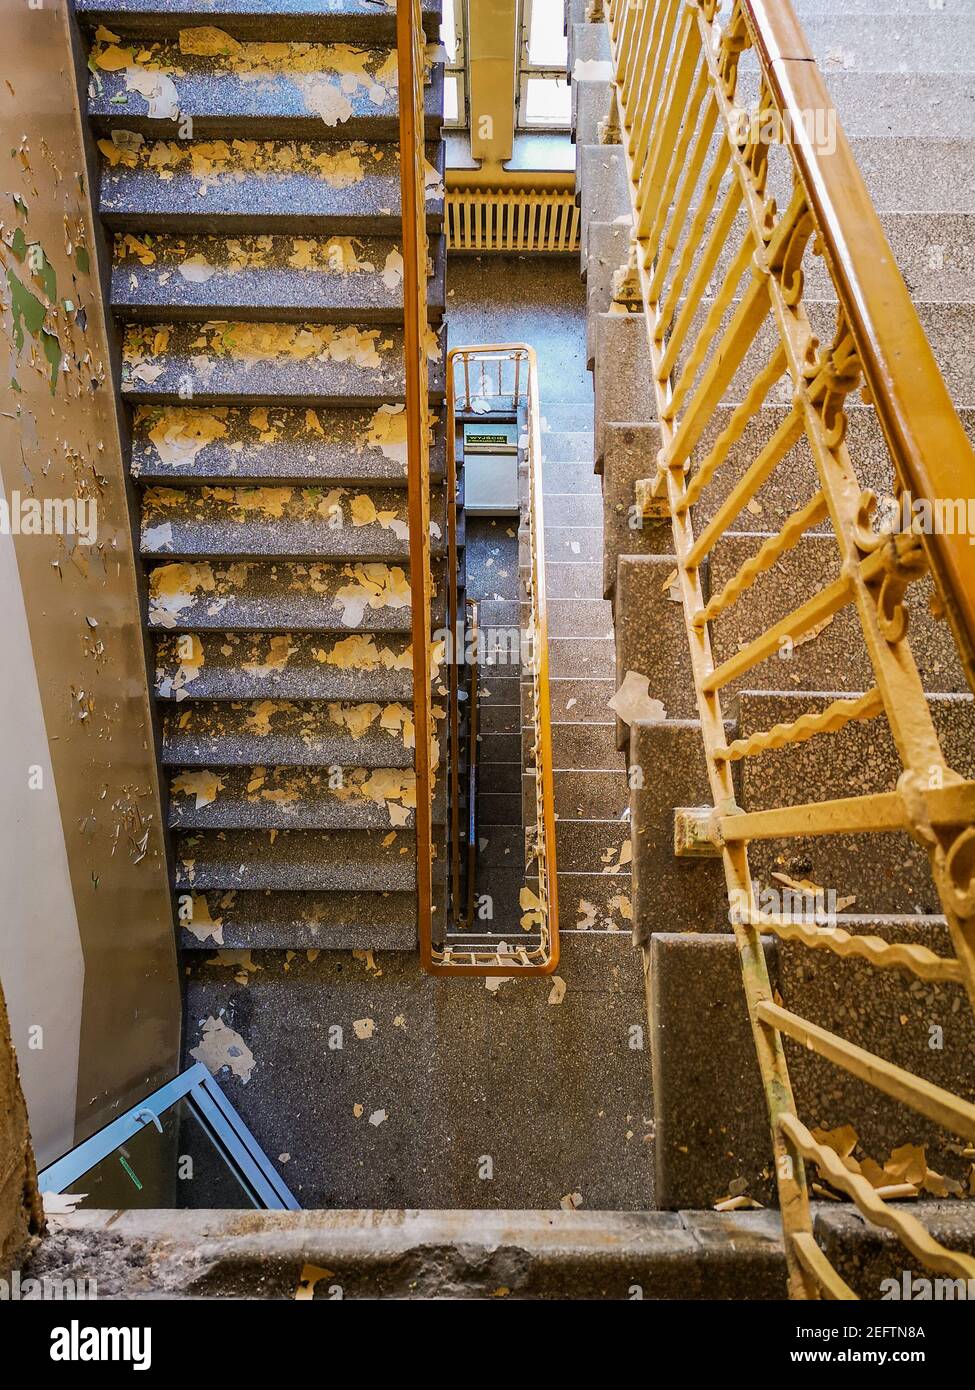 Dirty concrete staircase with metal railings in old abandoned hospital Stock Photo